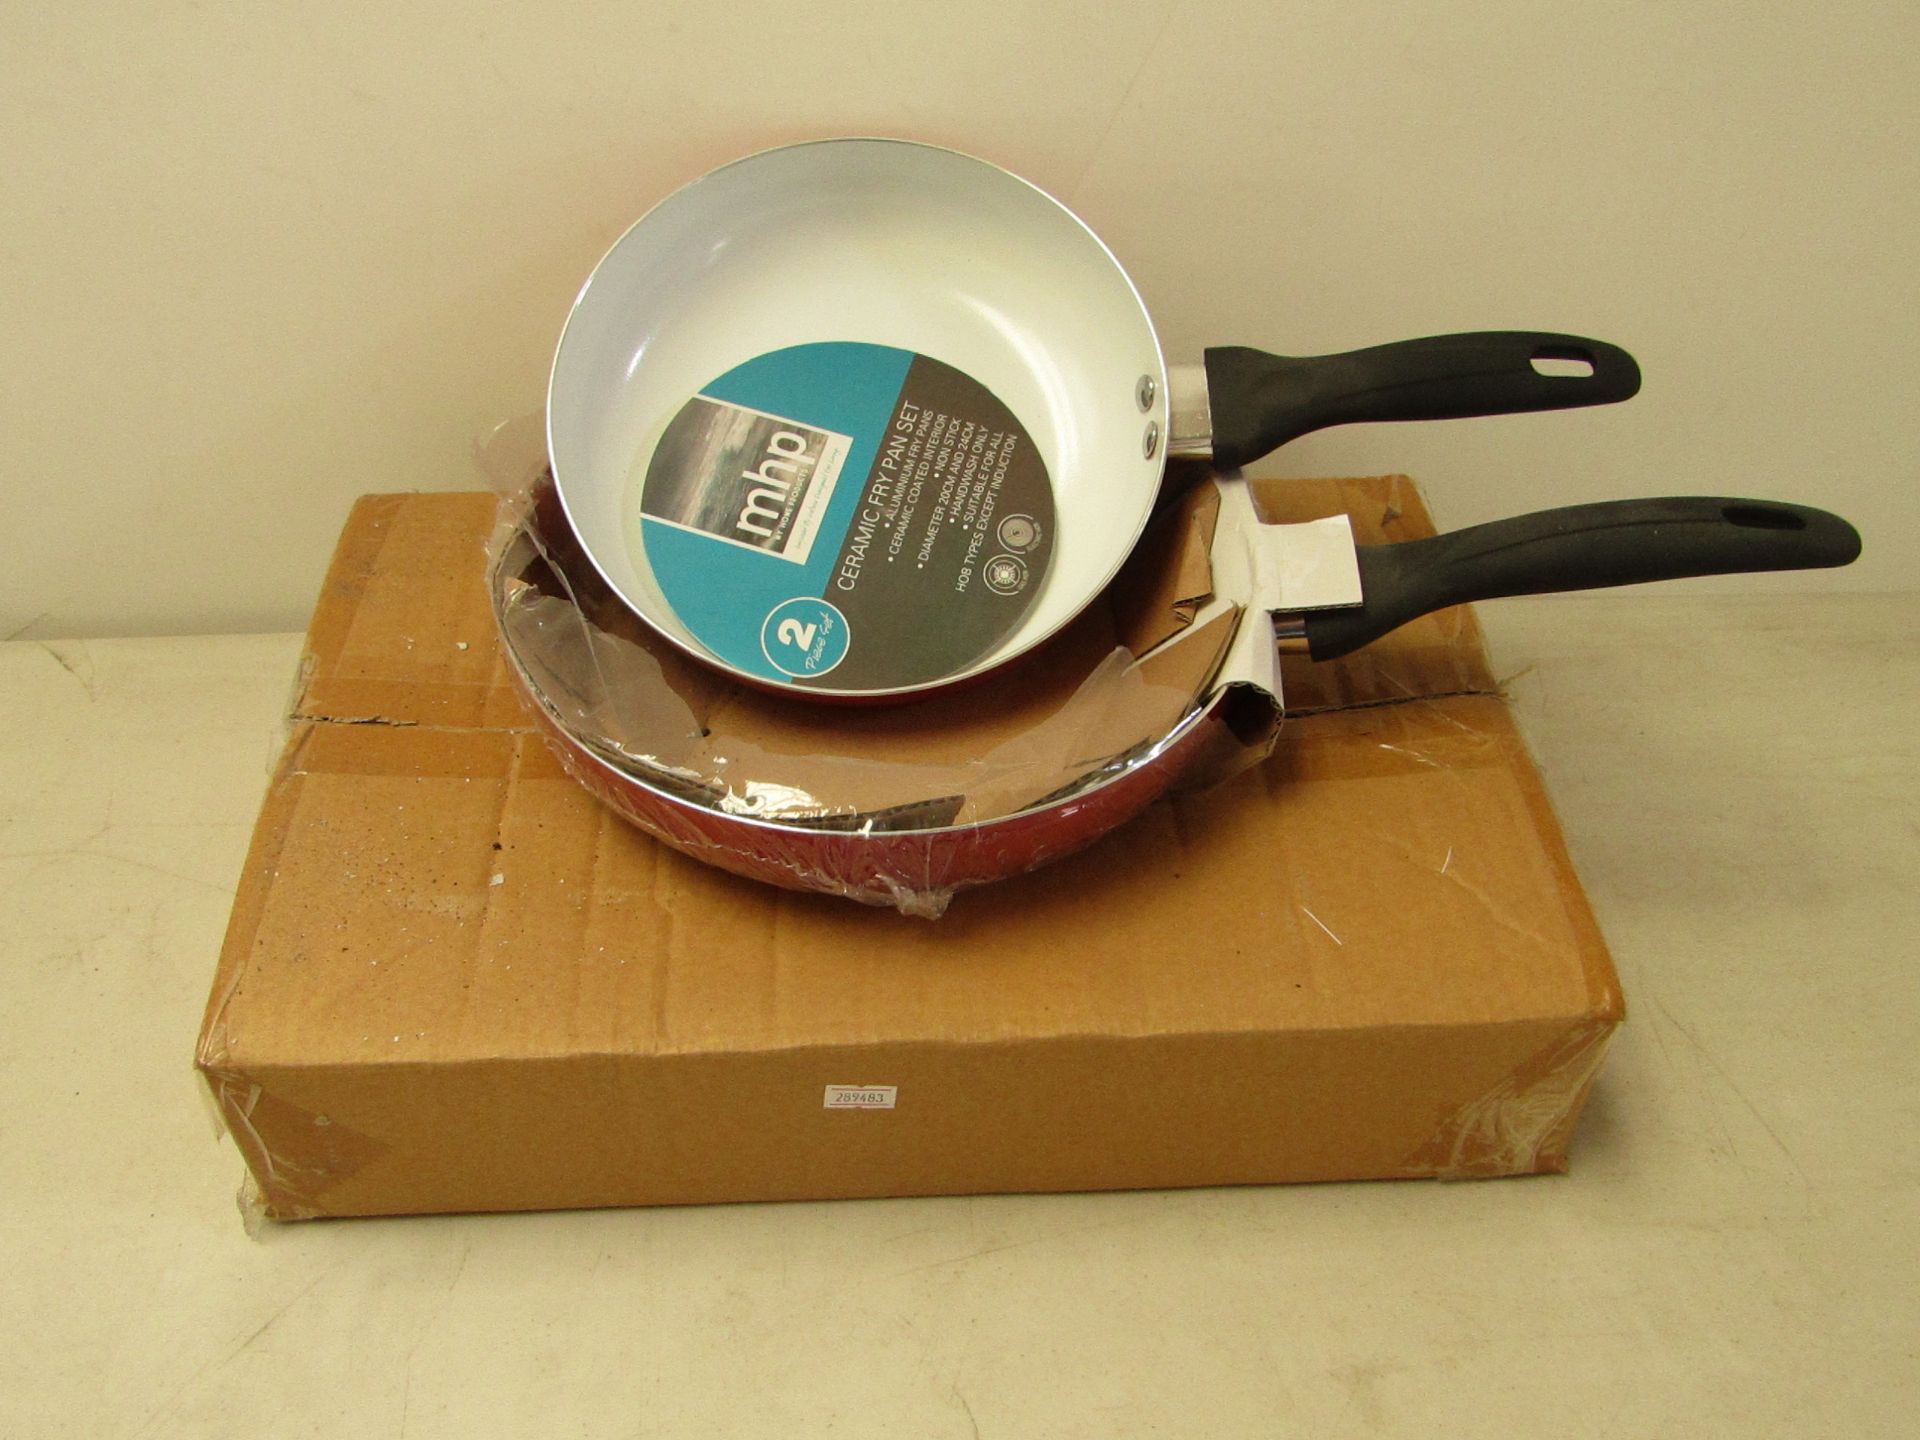 2 Piece mhp ceramic fry pan set, new and boxed.